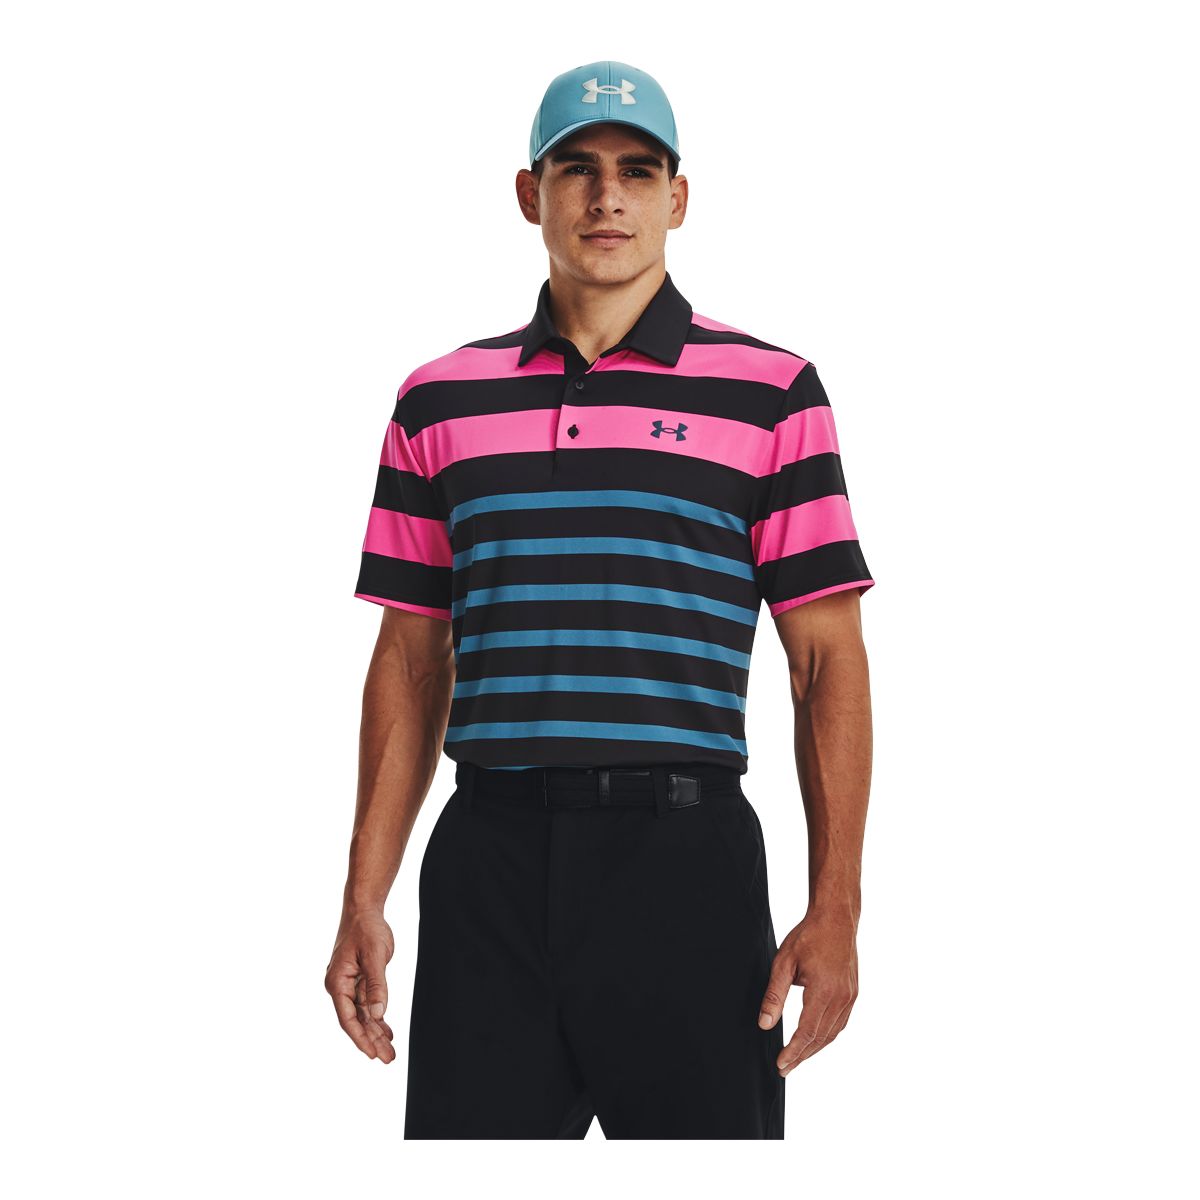 Under Armour Men's Playoff Polo 3.0 Stripe T Shirt